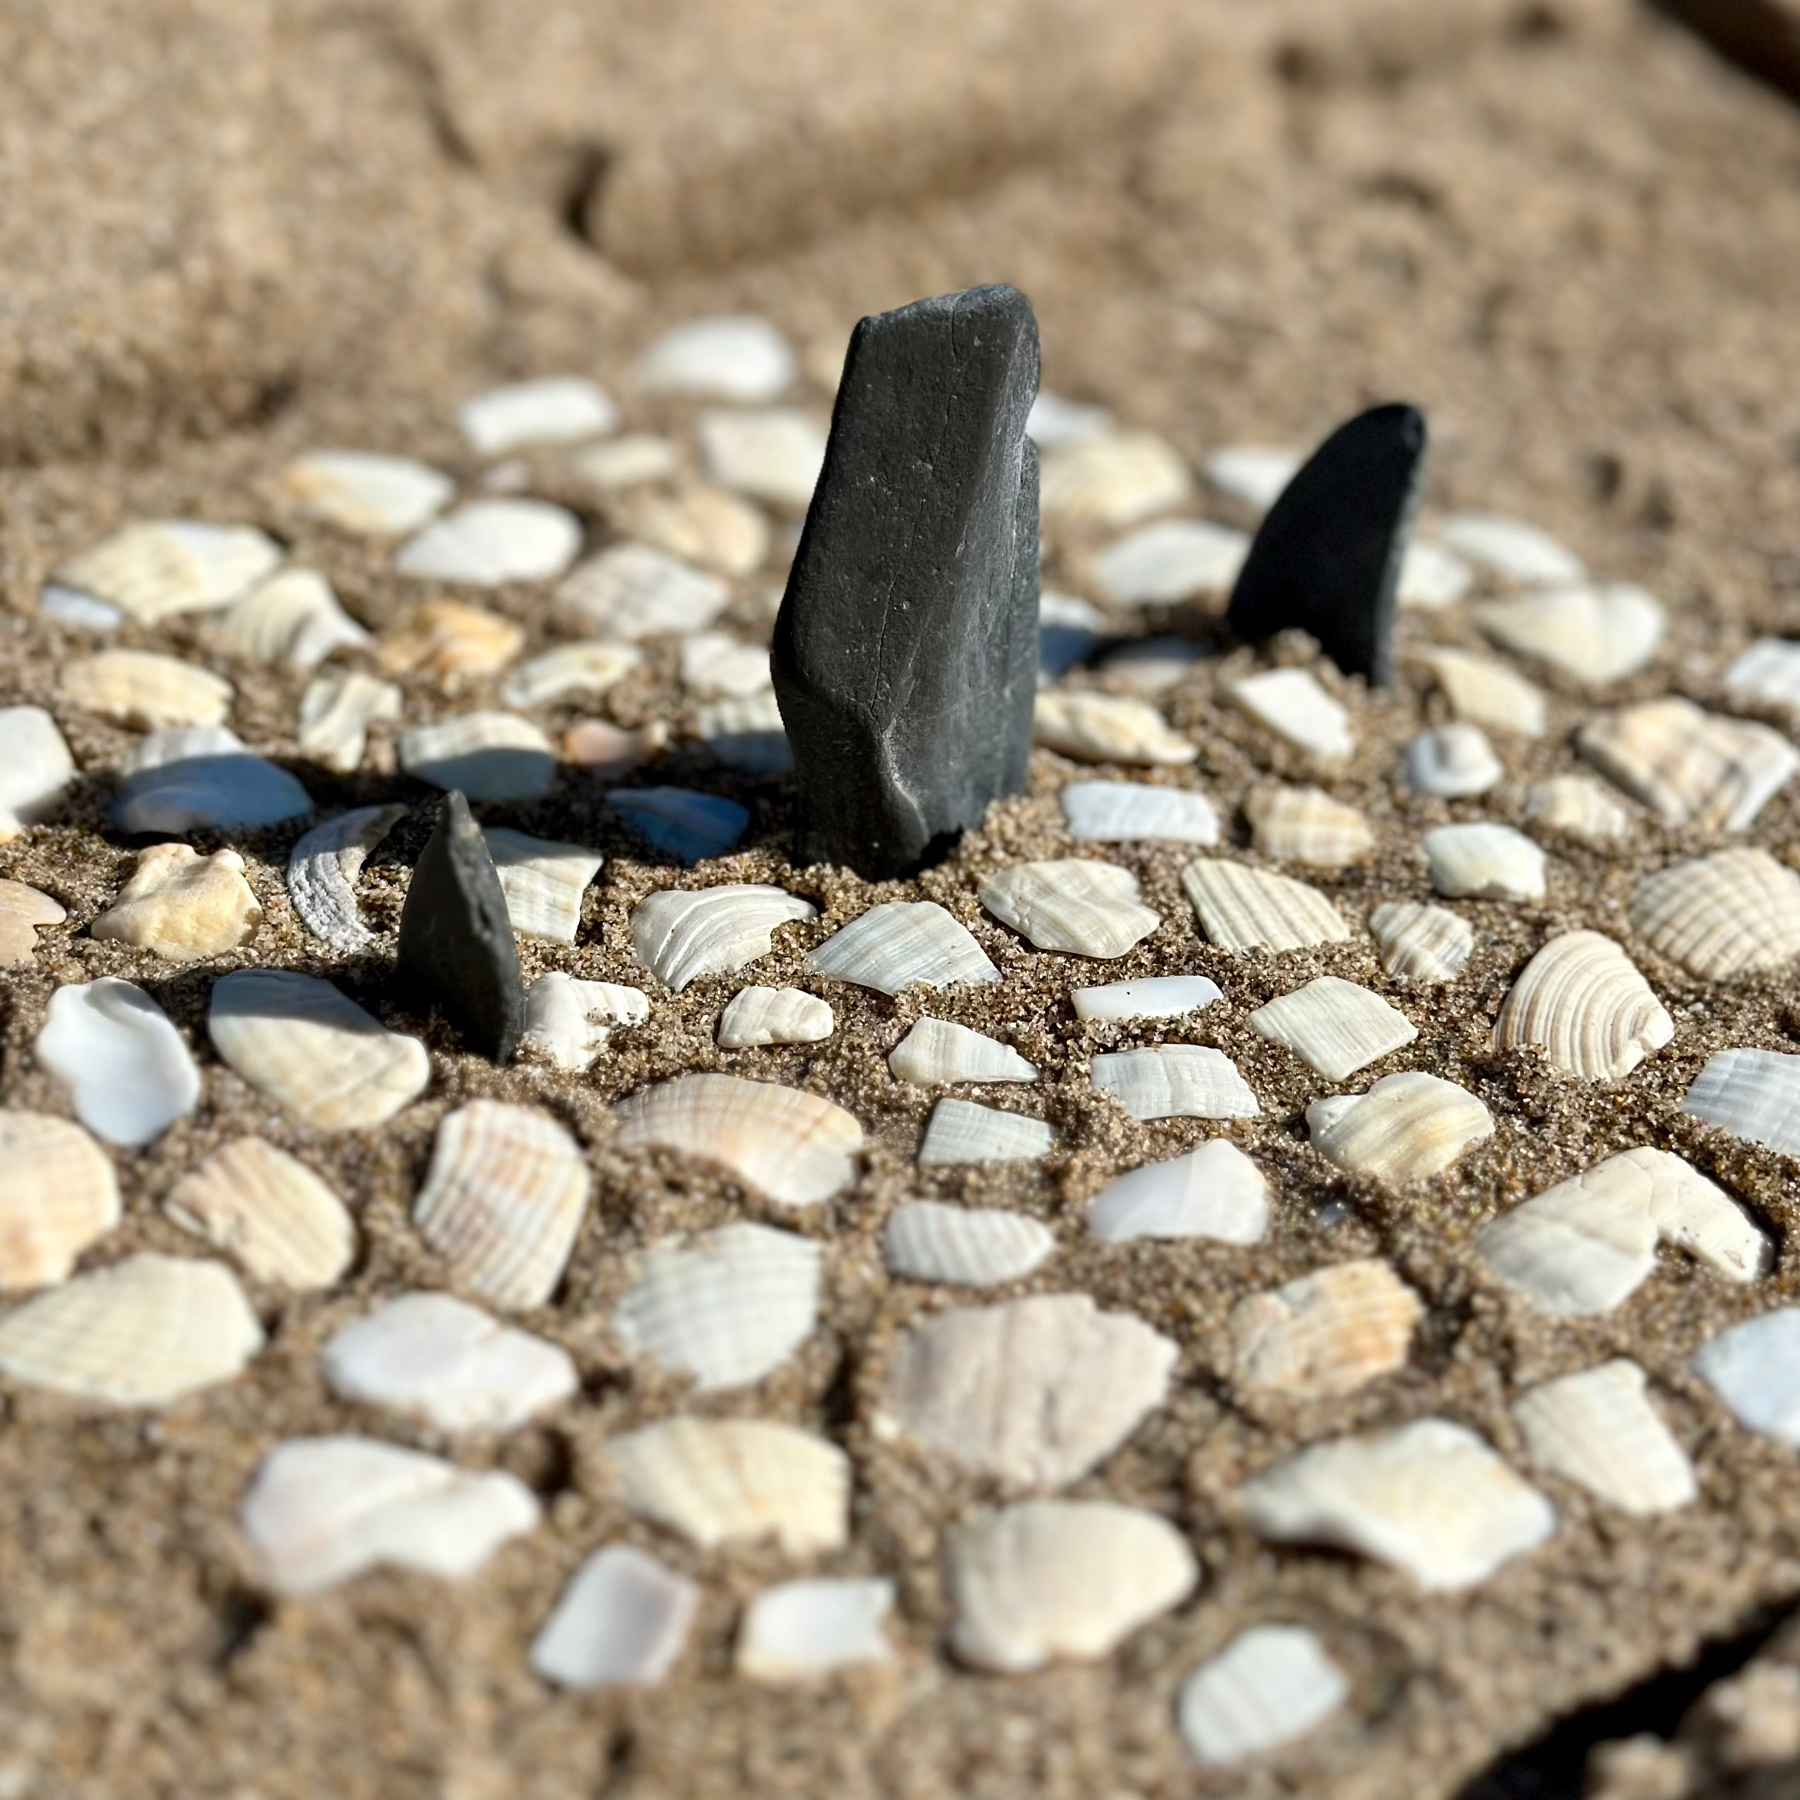 Several pieces of slate poking vertically out of the sand like monoliths, with a circular mosaic of shell fragments surrounding them.